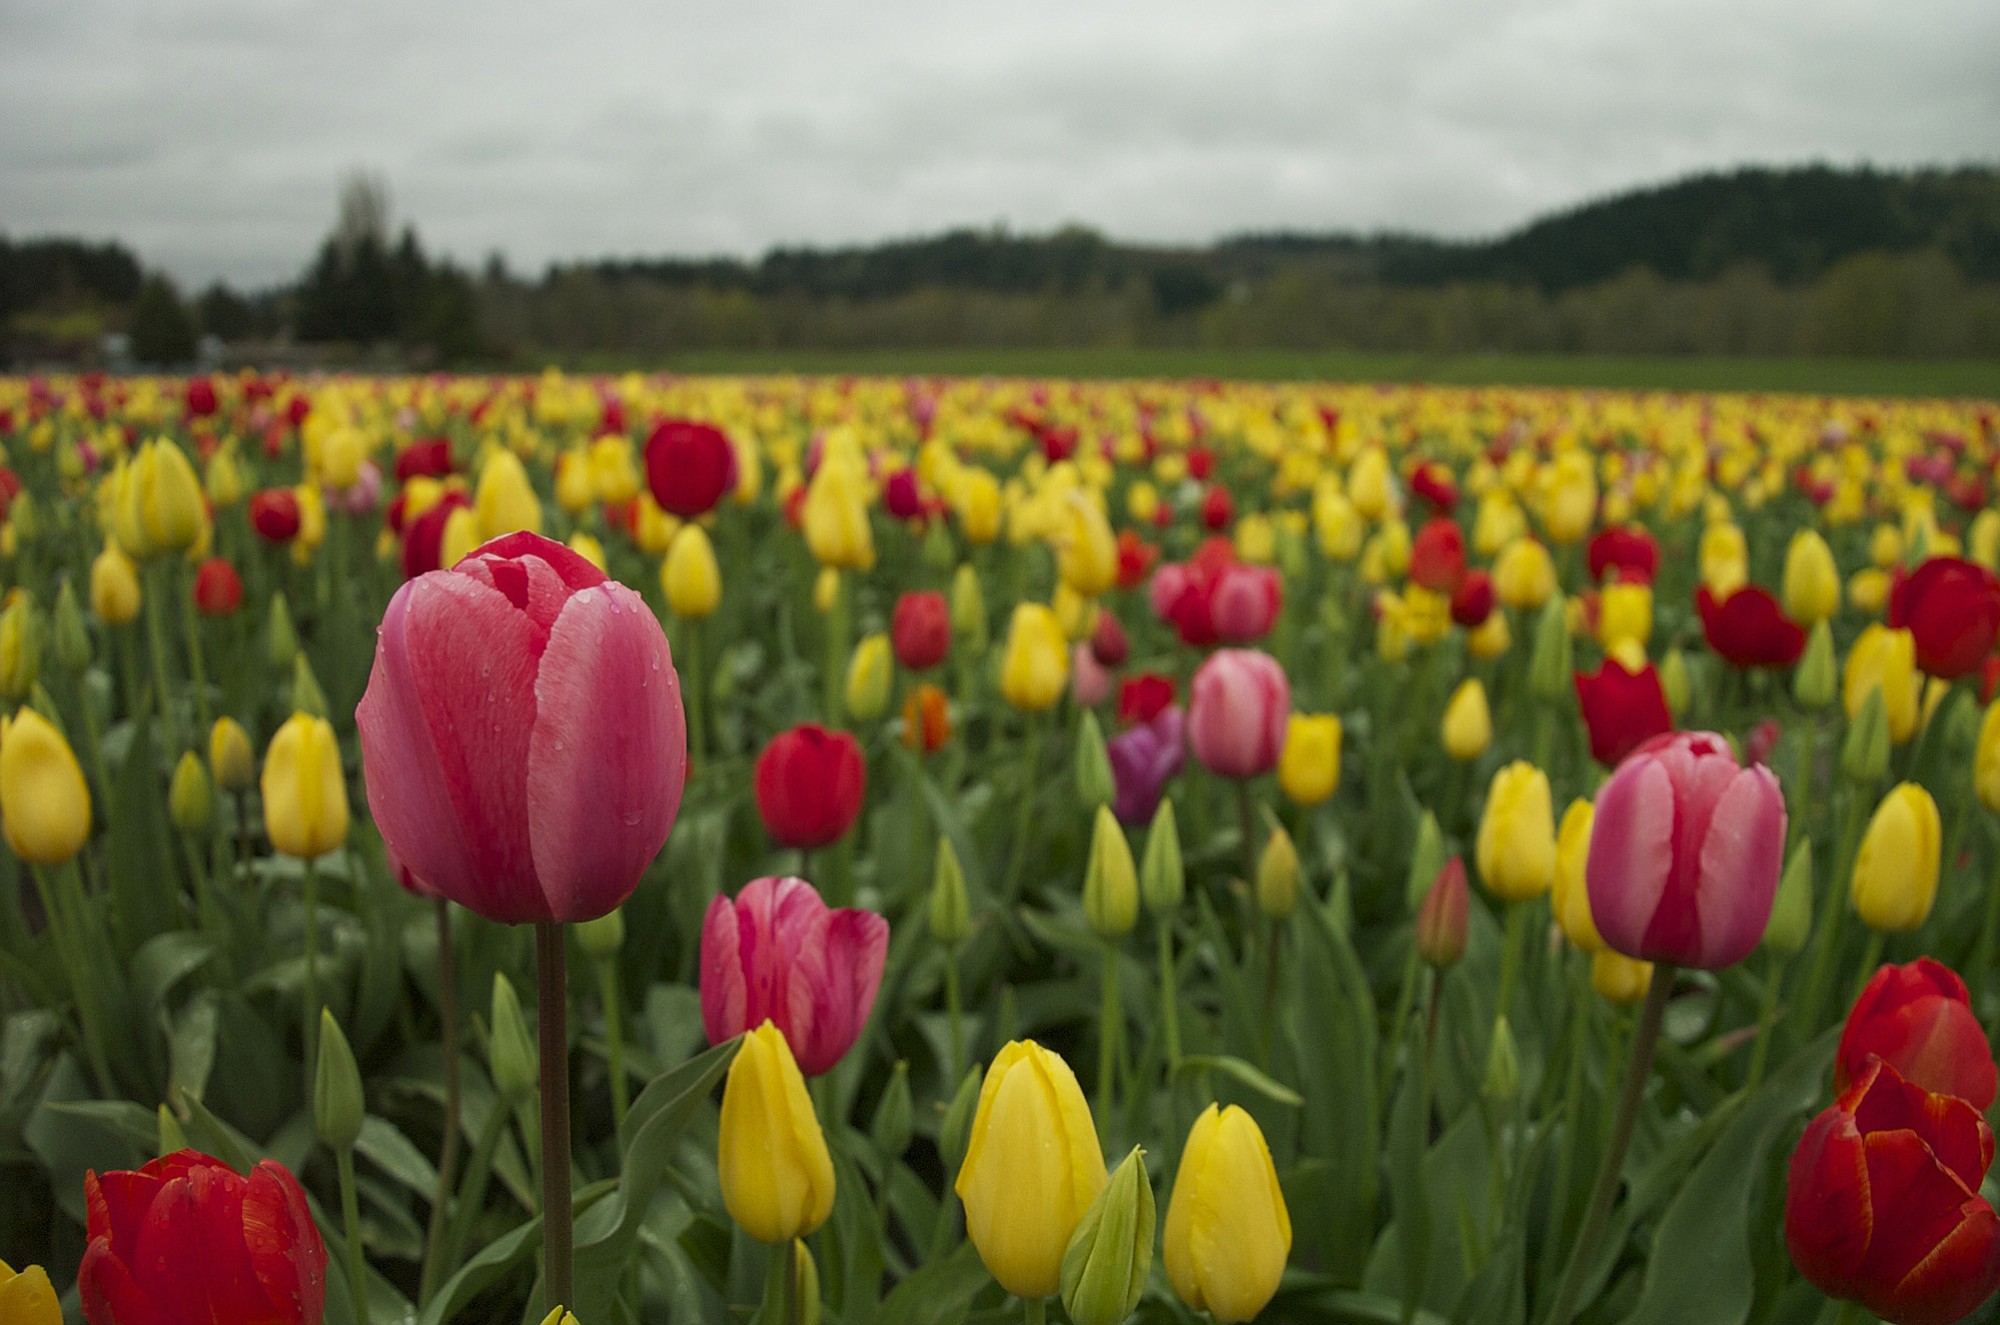 After an unusually warm winter, the tulips are out early at Woodland's Holland America Bulb Farm.